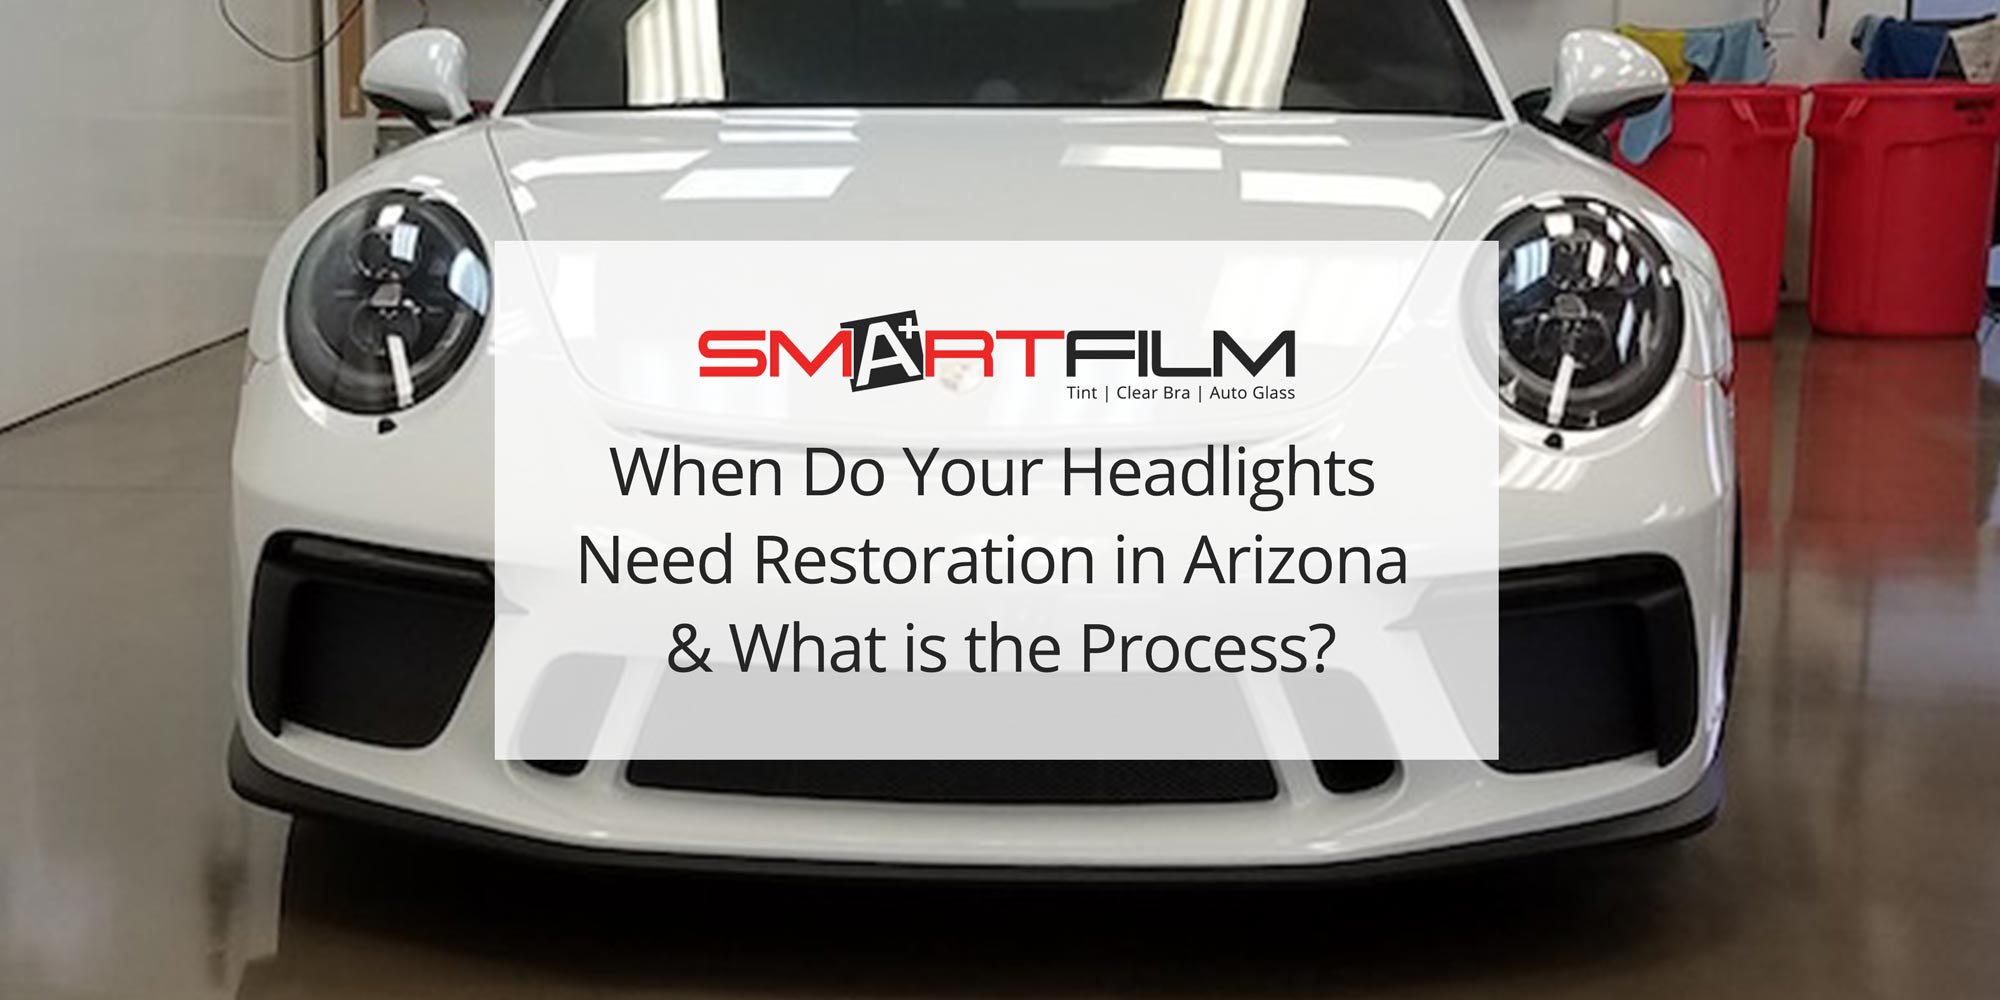 When Do Your Headlights Need Restoration in Arizona & What is the Process?